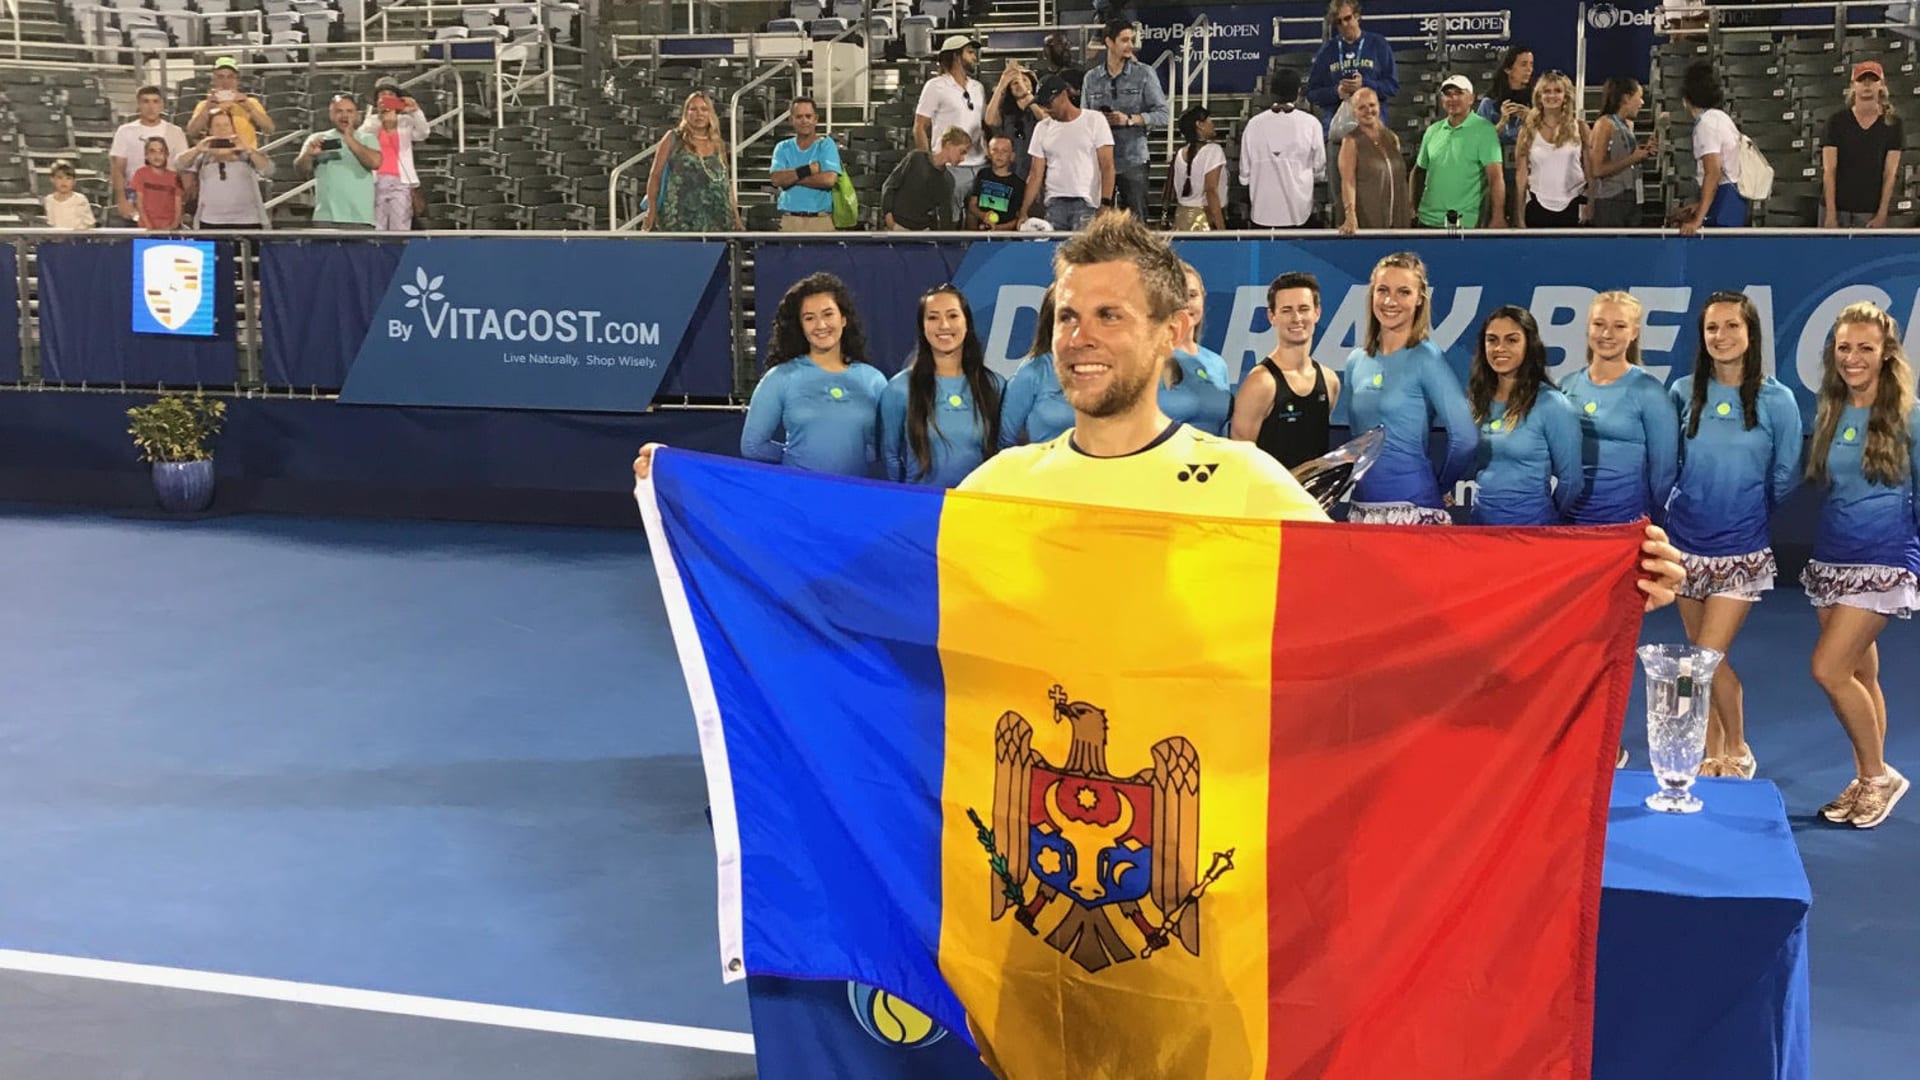 After winning his first ATP title, Albot is putting Moldova on the map